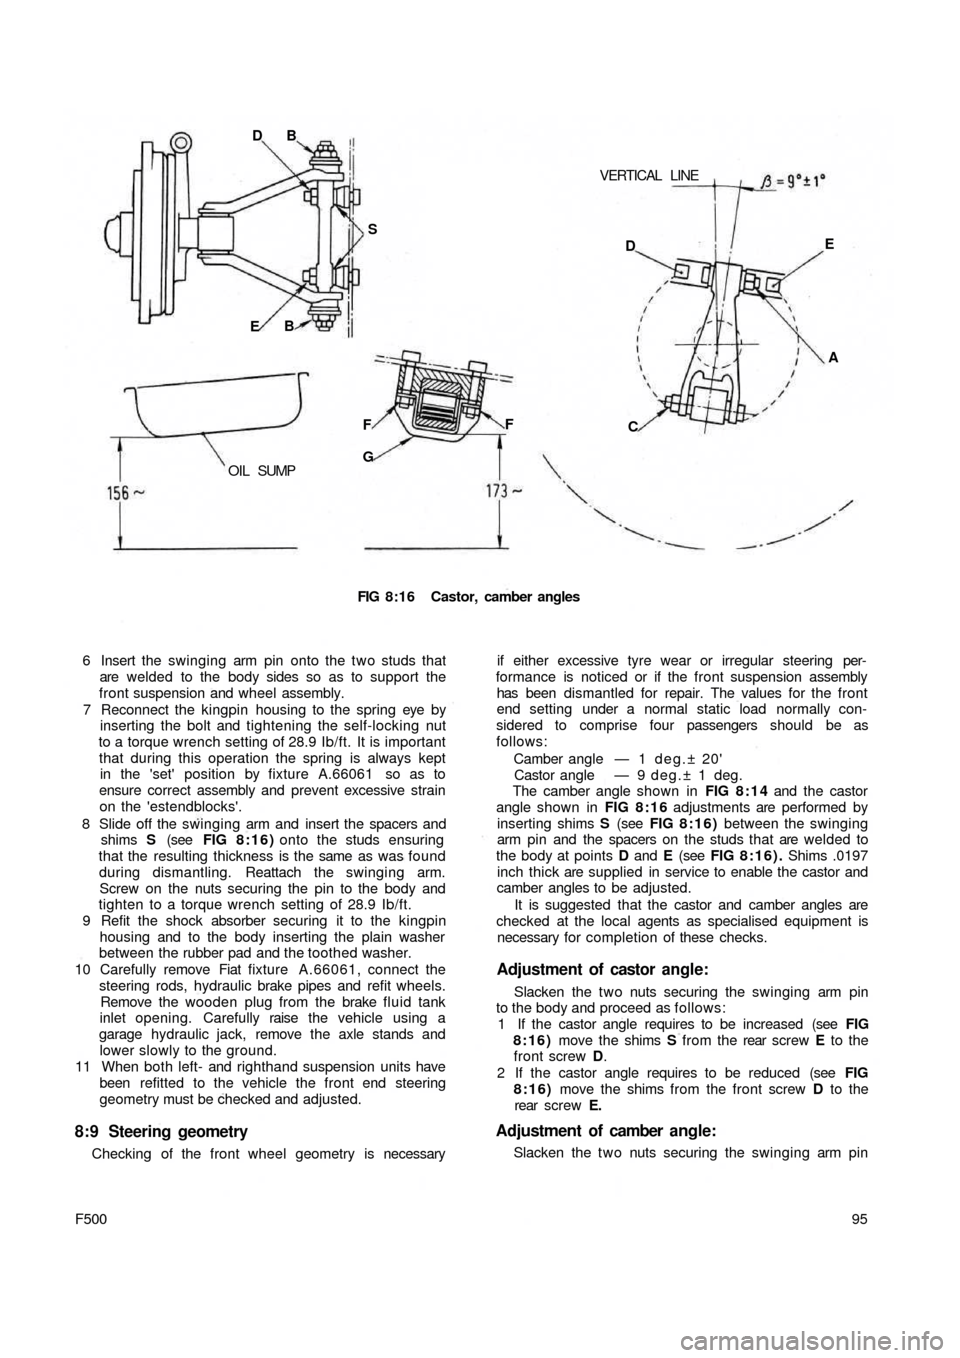 FIAT 500 1971 1.G Workshop Manual VERTICAL  LINE DB
S
EB
OIL  SUMPF
GF
FIG 8:16 Castor, camber angles
6 Insert the swinging arm pin onto the two studs that
are welded  to the  body sides so as to support the
front suspension and wheel